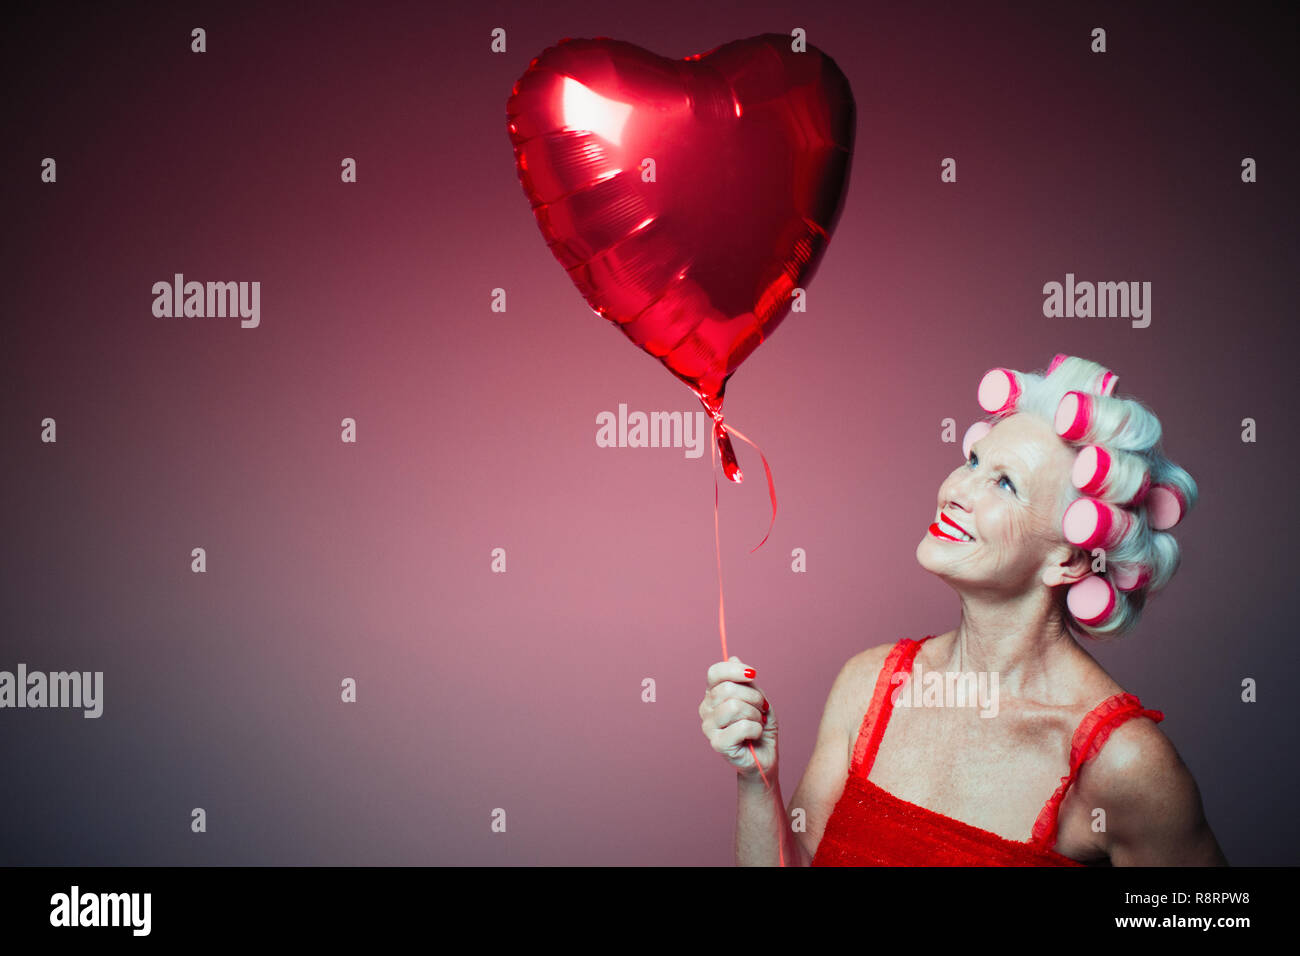 Portrait of smiling senior woman with hair in curlers holding heart-shape balloon Banque D'Images